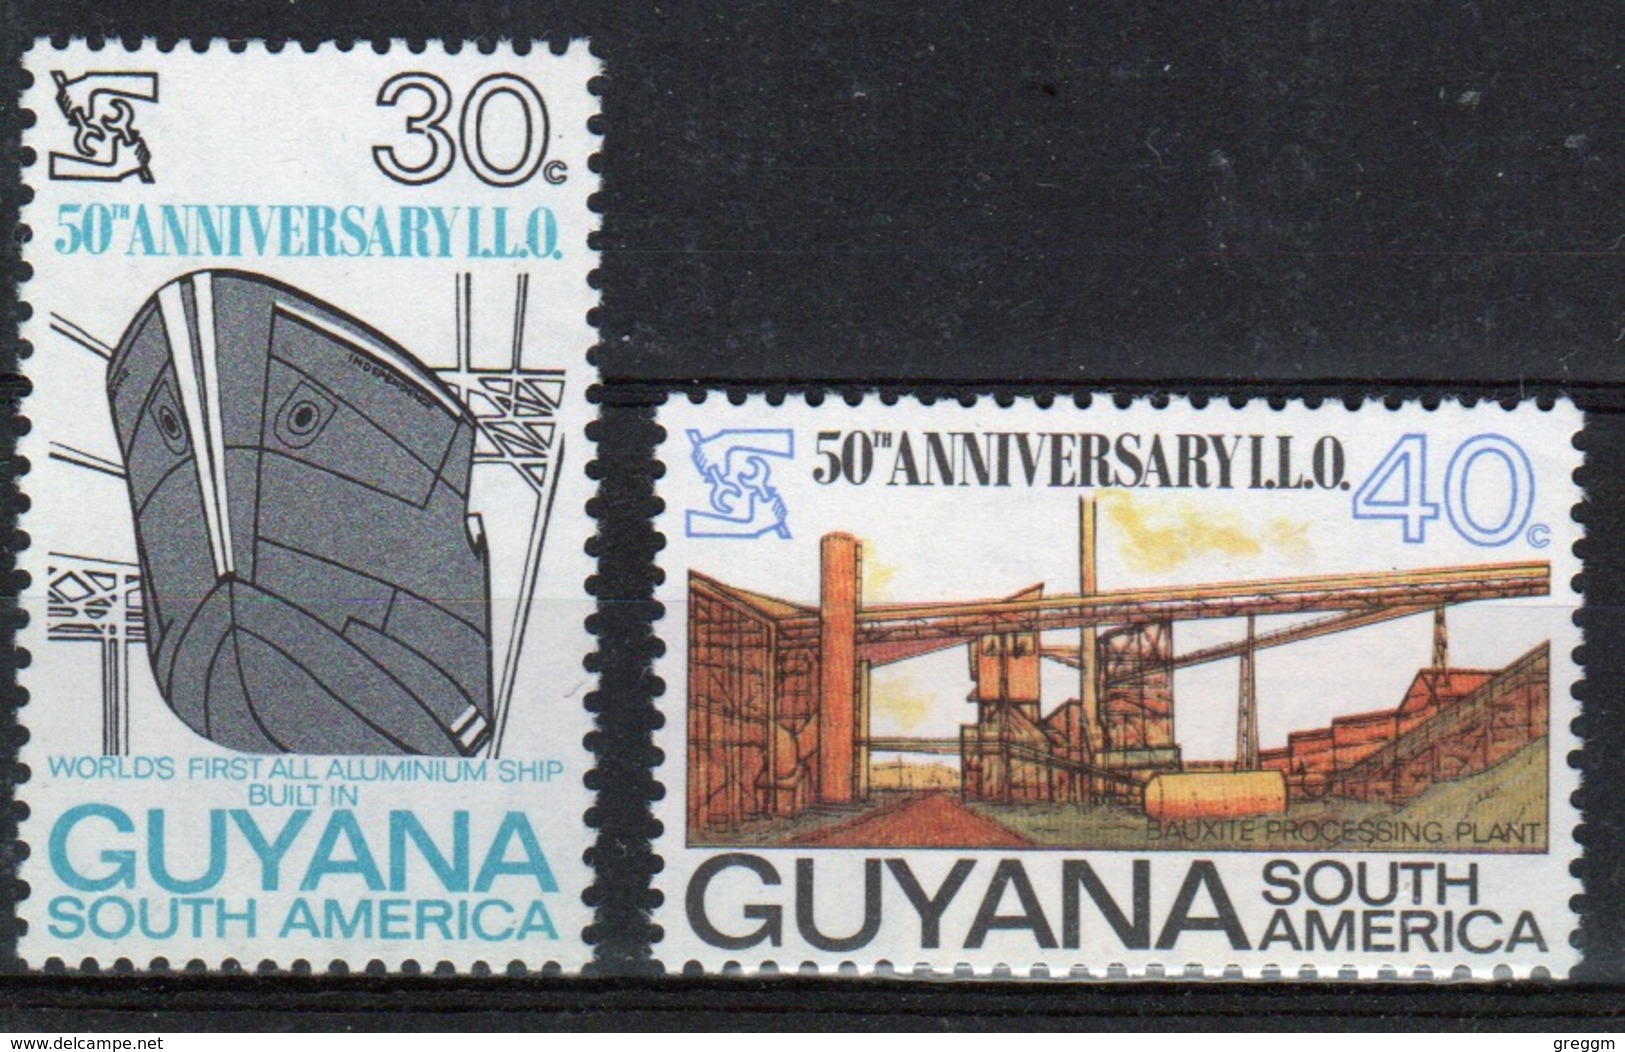 Guyana 1969 Set Of Stamps To Celebrate 50th Anniversary Of I.L.O. - Guyana (1966-...)